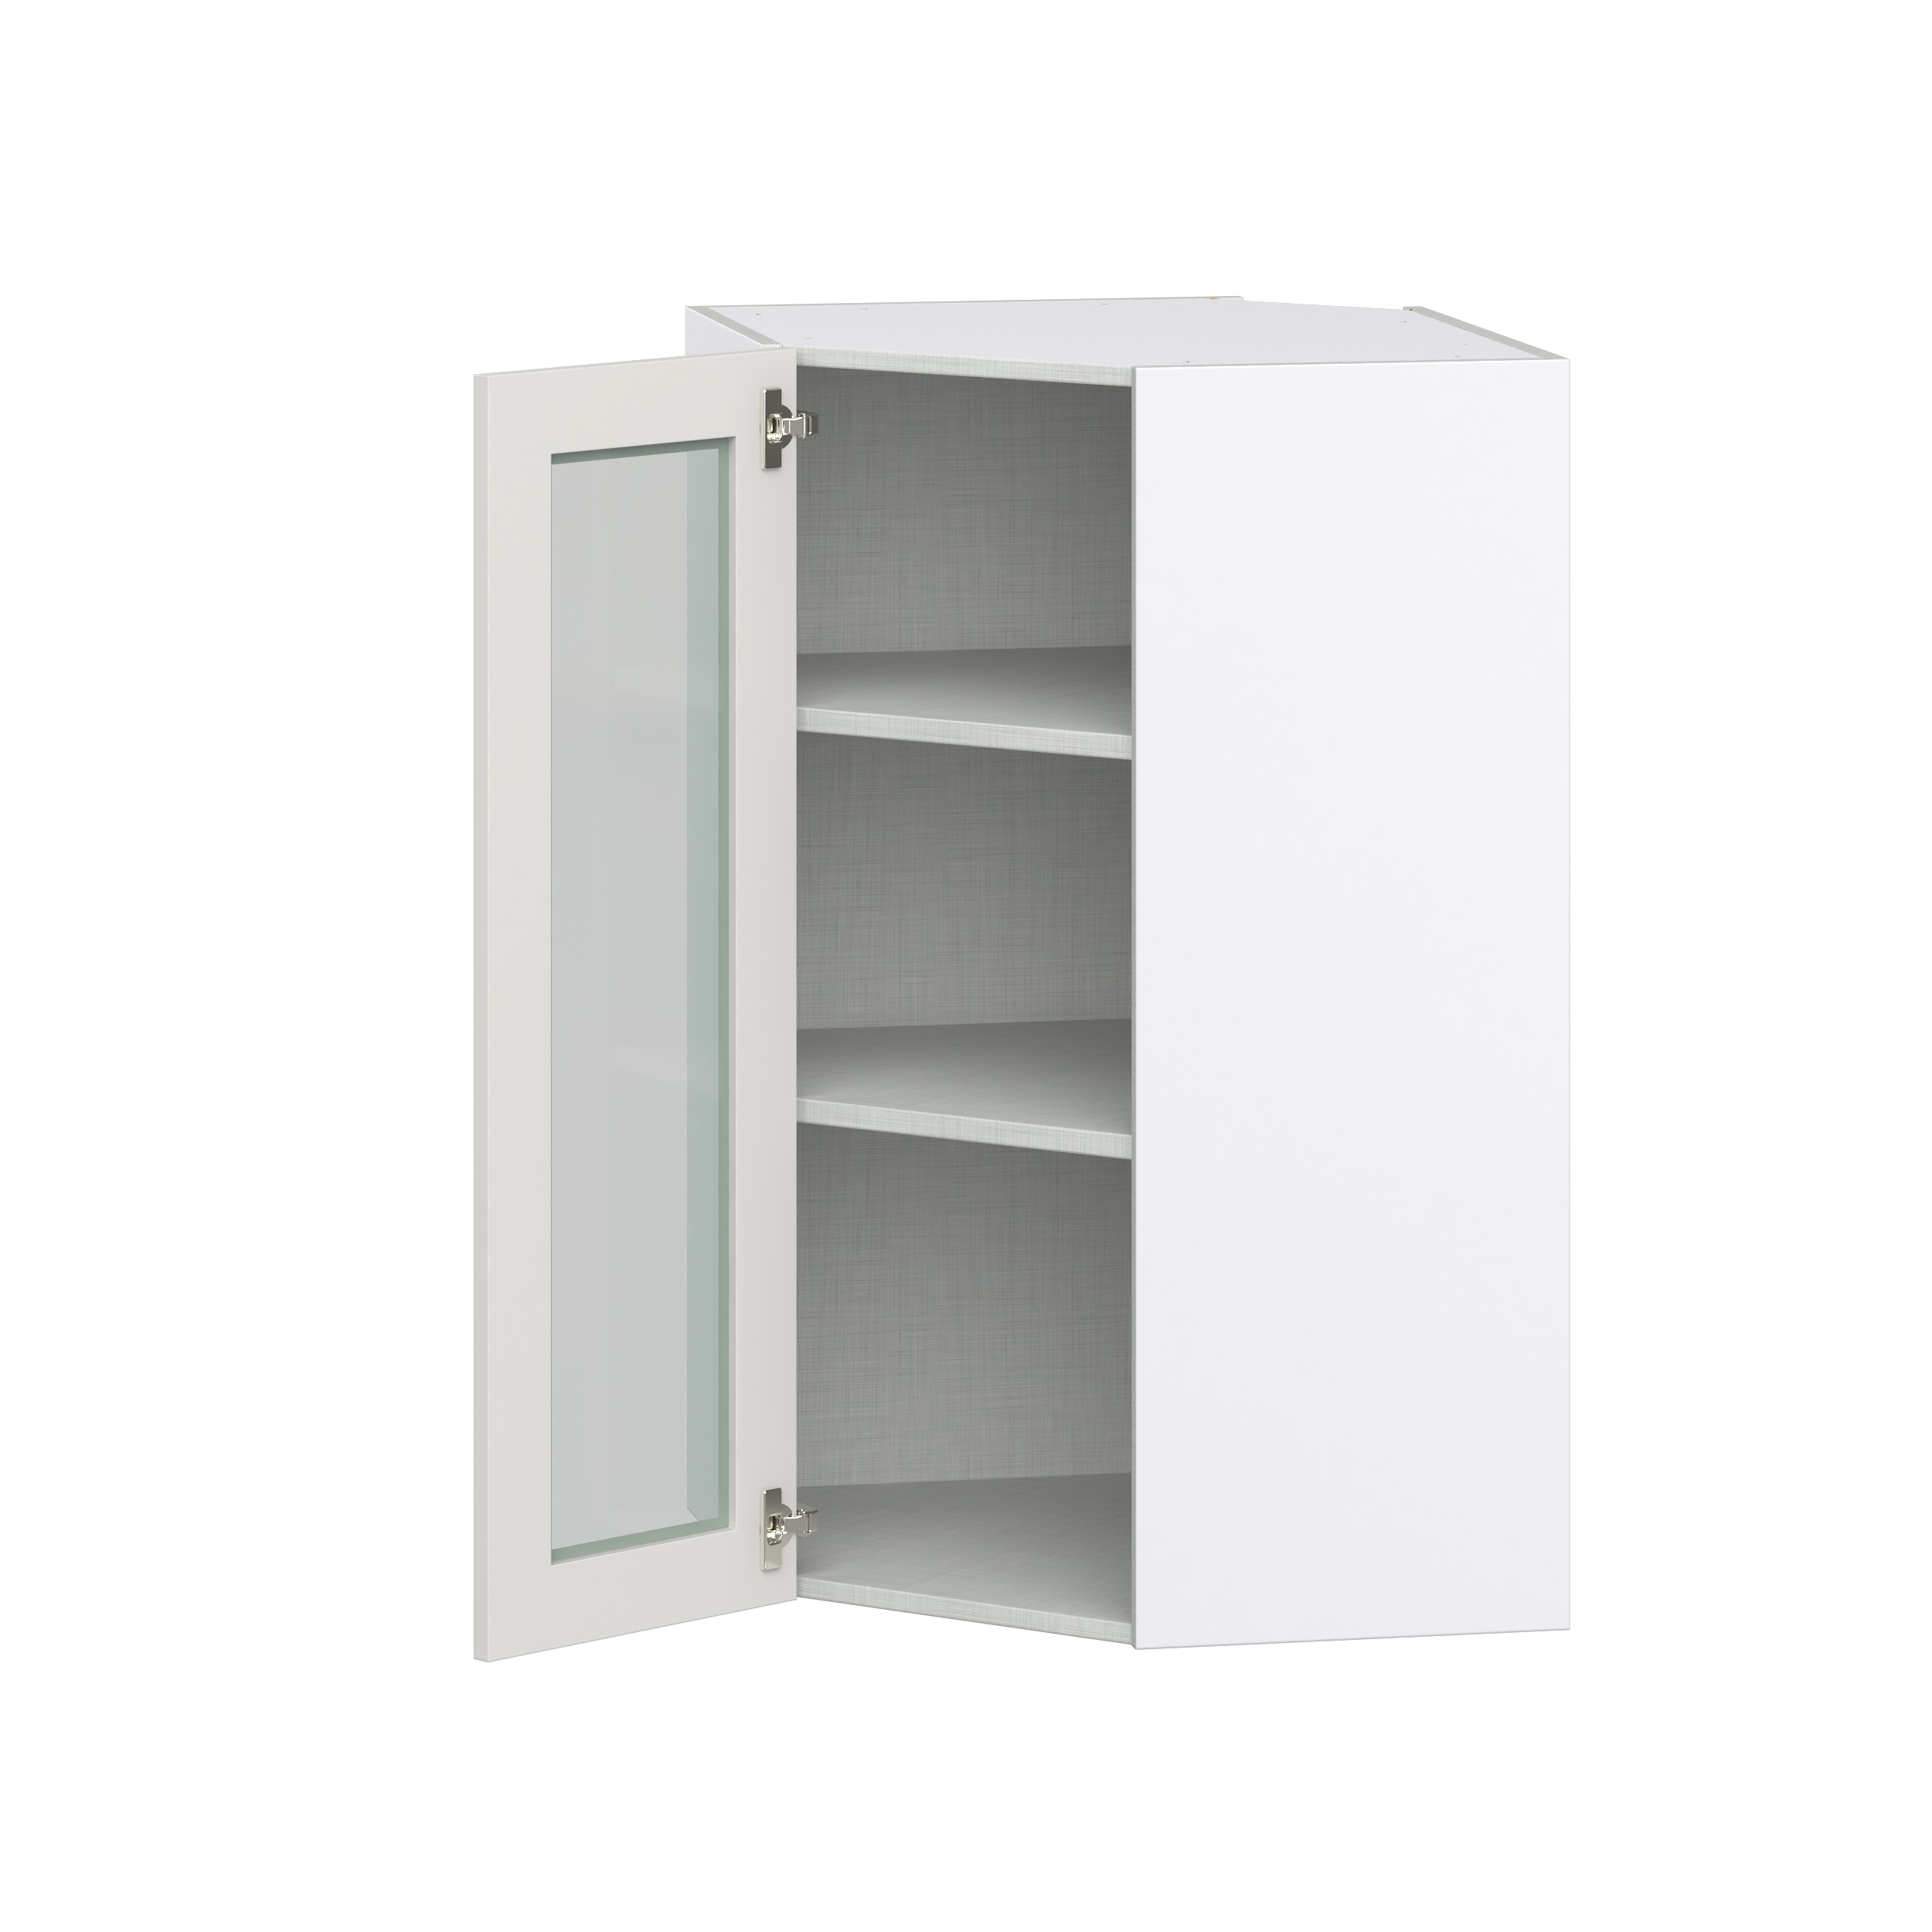 Wisteria Painted Light Gray Recessed Assembled Corner Wall Cabinet with a Glass Door (24 in. W x 40 in. H x 24 in. D)